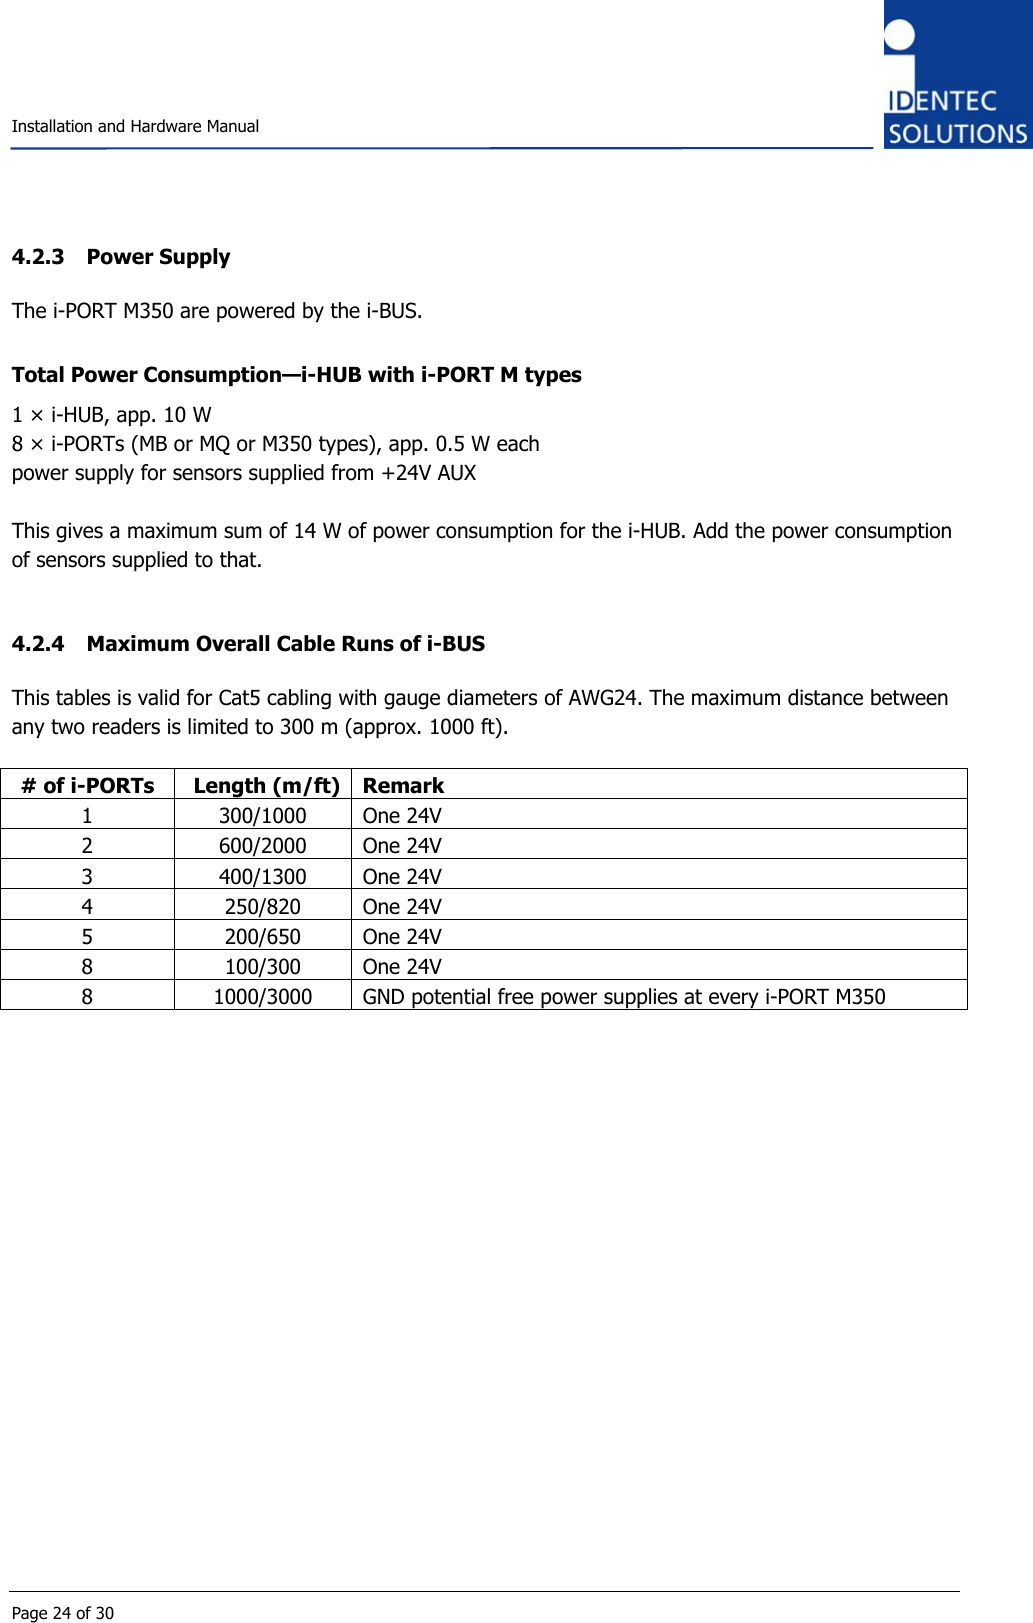    Installation and Hardware Manual  Page 24 of 30 4.2.3 Power Supply The i-PORT M350 are powered by the i-BUS.  Total Power Consumption—i-HUB with i-PORT M types 1 × i-HUB, app. 10 W 8 × i-PORTs (MB or MQ or M350 types), app. 0.5 W each power supply for sensors supplied from +24V AUX  This gives a maximum sum of 14 W of power consumption for the i-HUB. Add the power consumption of sensors supplied to that.  4.2.4 Maximum Overall Cable Runs of i-BUS This tables is valid for Cat5 cabling with gauge diameters of AWG24. The maximum distance between any two readers is limited to 300 m (approx. 1000 ft).  # of i-PORTs  Length (m/ft)  Remark 1  300/1000  One 24V  2  600/2000  One 24V  3  400/1300  One 24V  4  250/820  One 24V  5  200/650  One 24V  8  100/300  One 24V  8  1000/3000  GND potential free power supplies at every i-PORT M350                   